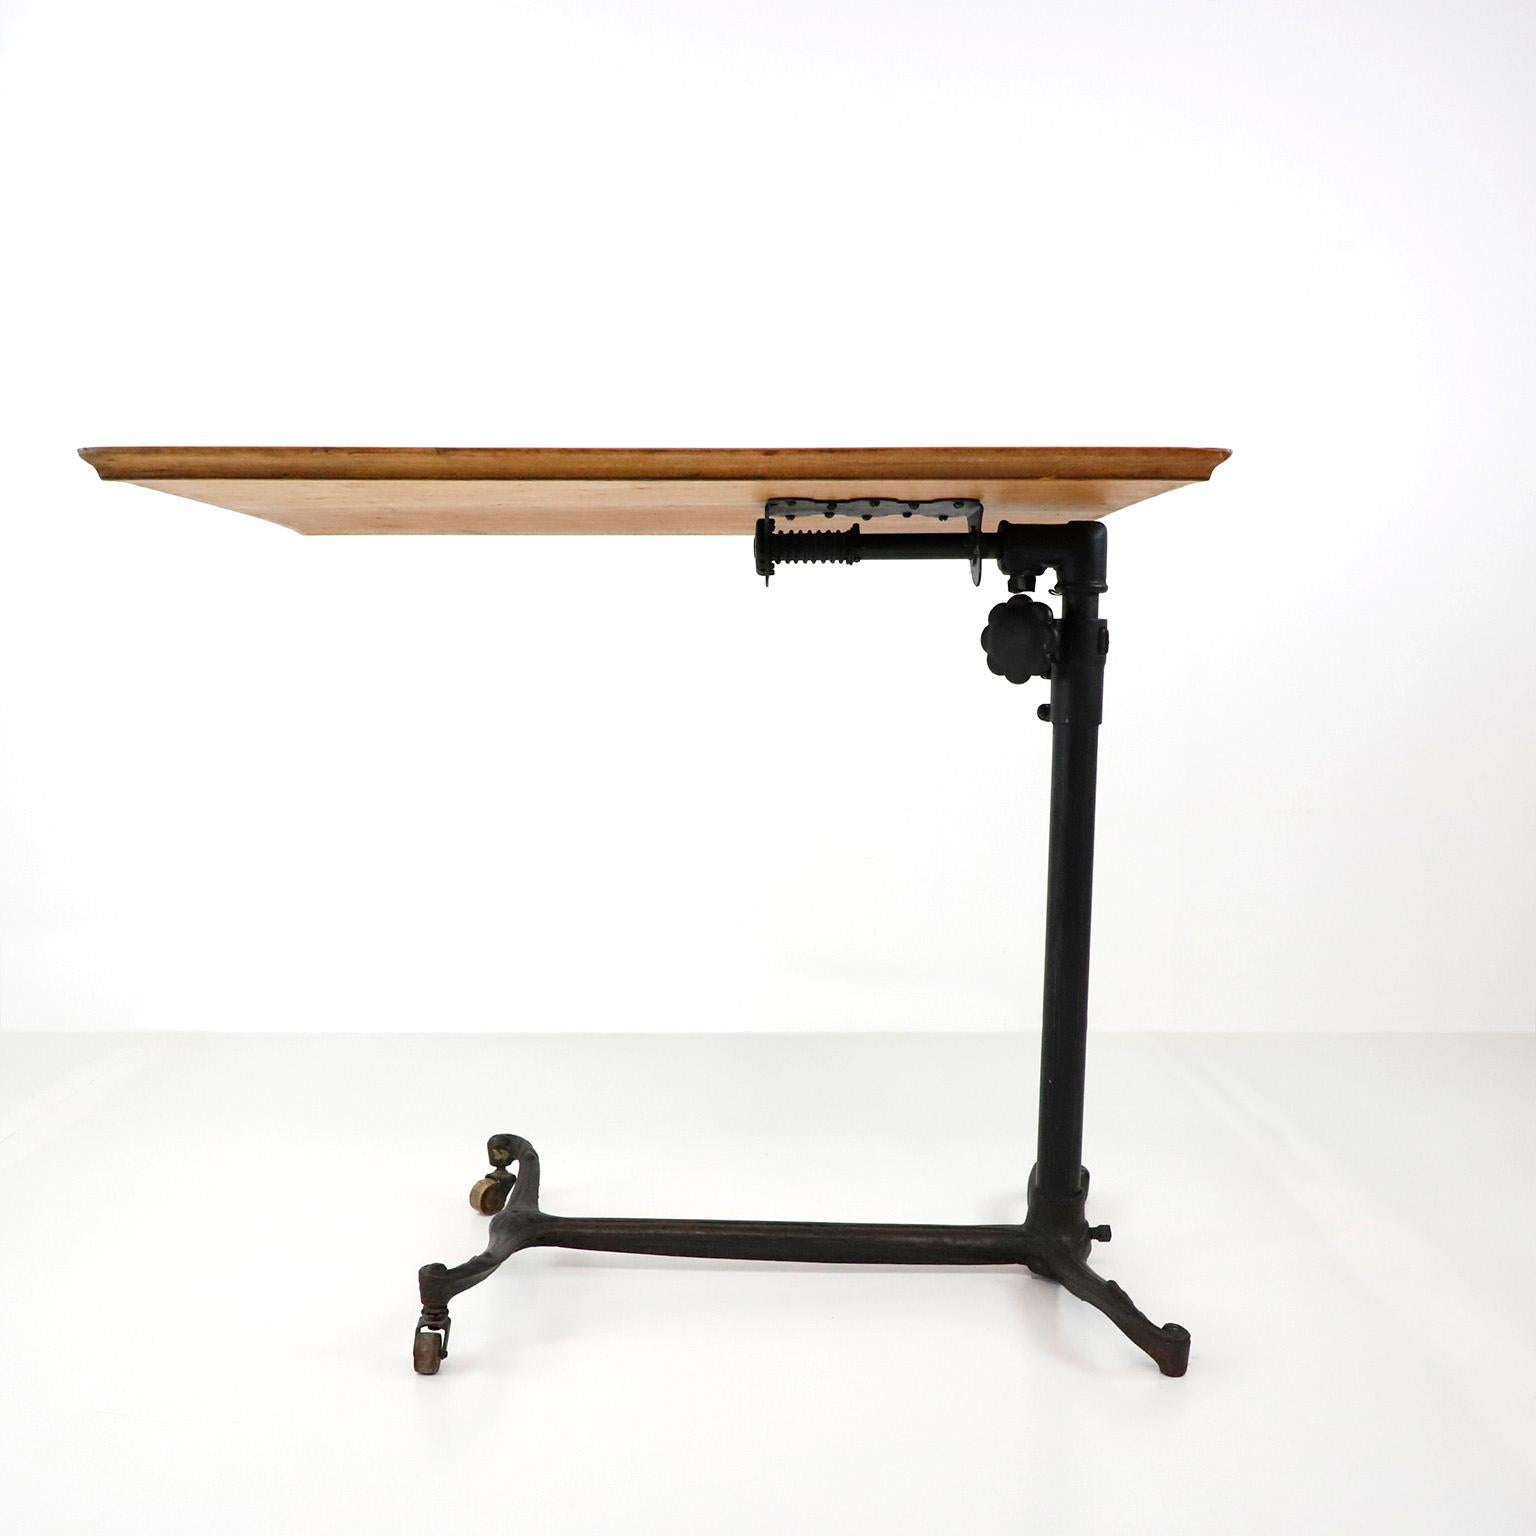 We offer this 19th century adjustable drafting table in cast iron. The top of the table are original and made in solid oak, supported by a finely cast iron base. The height is adjusted from 59 cm too 89 cm.